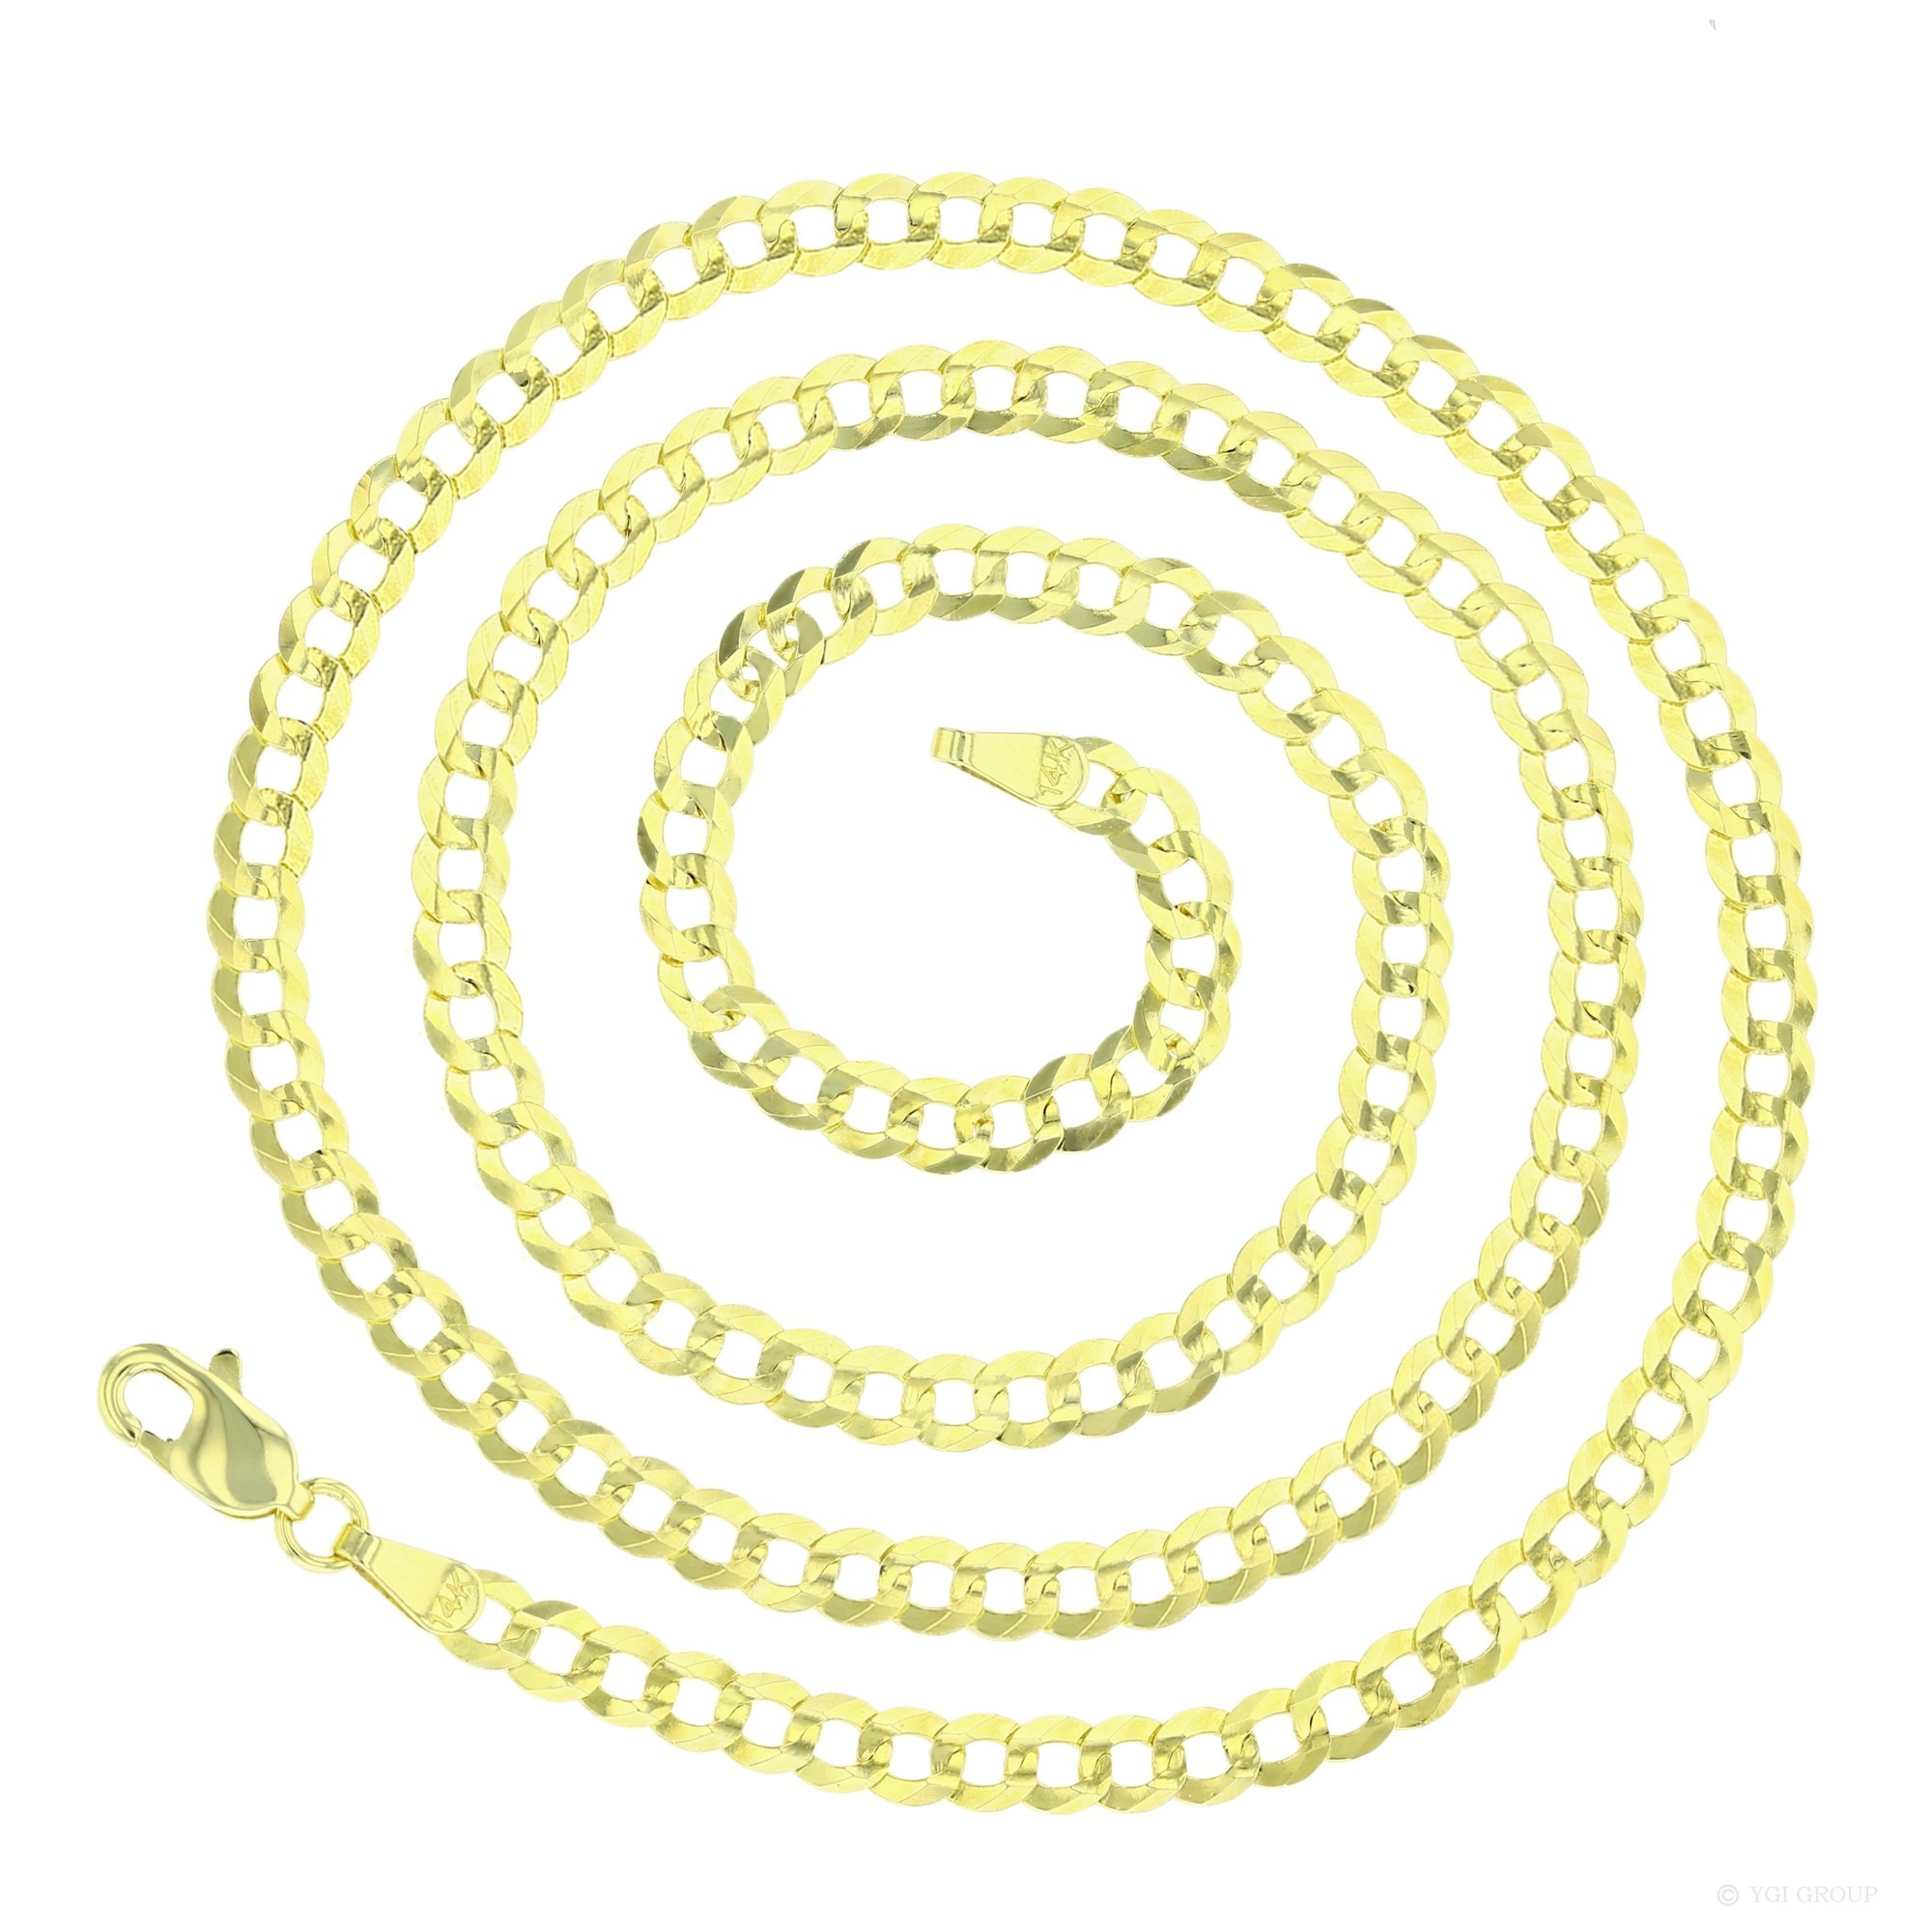 14KT Gold 24" Solid Yellow Cuban Chain 100 Gauge 3.80MM